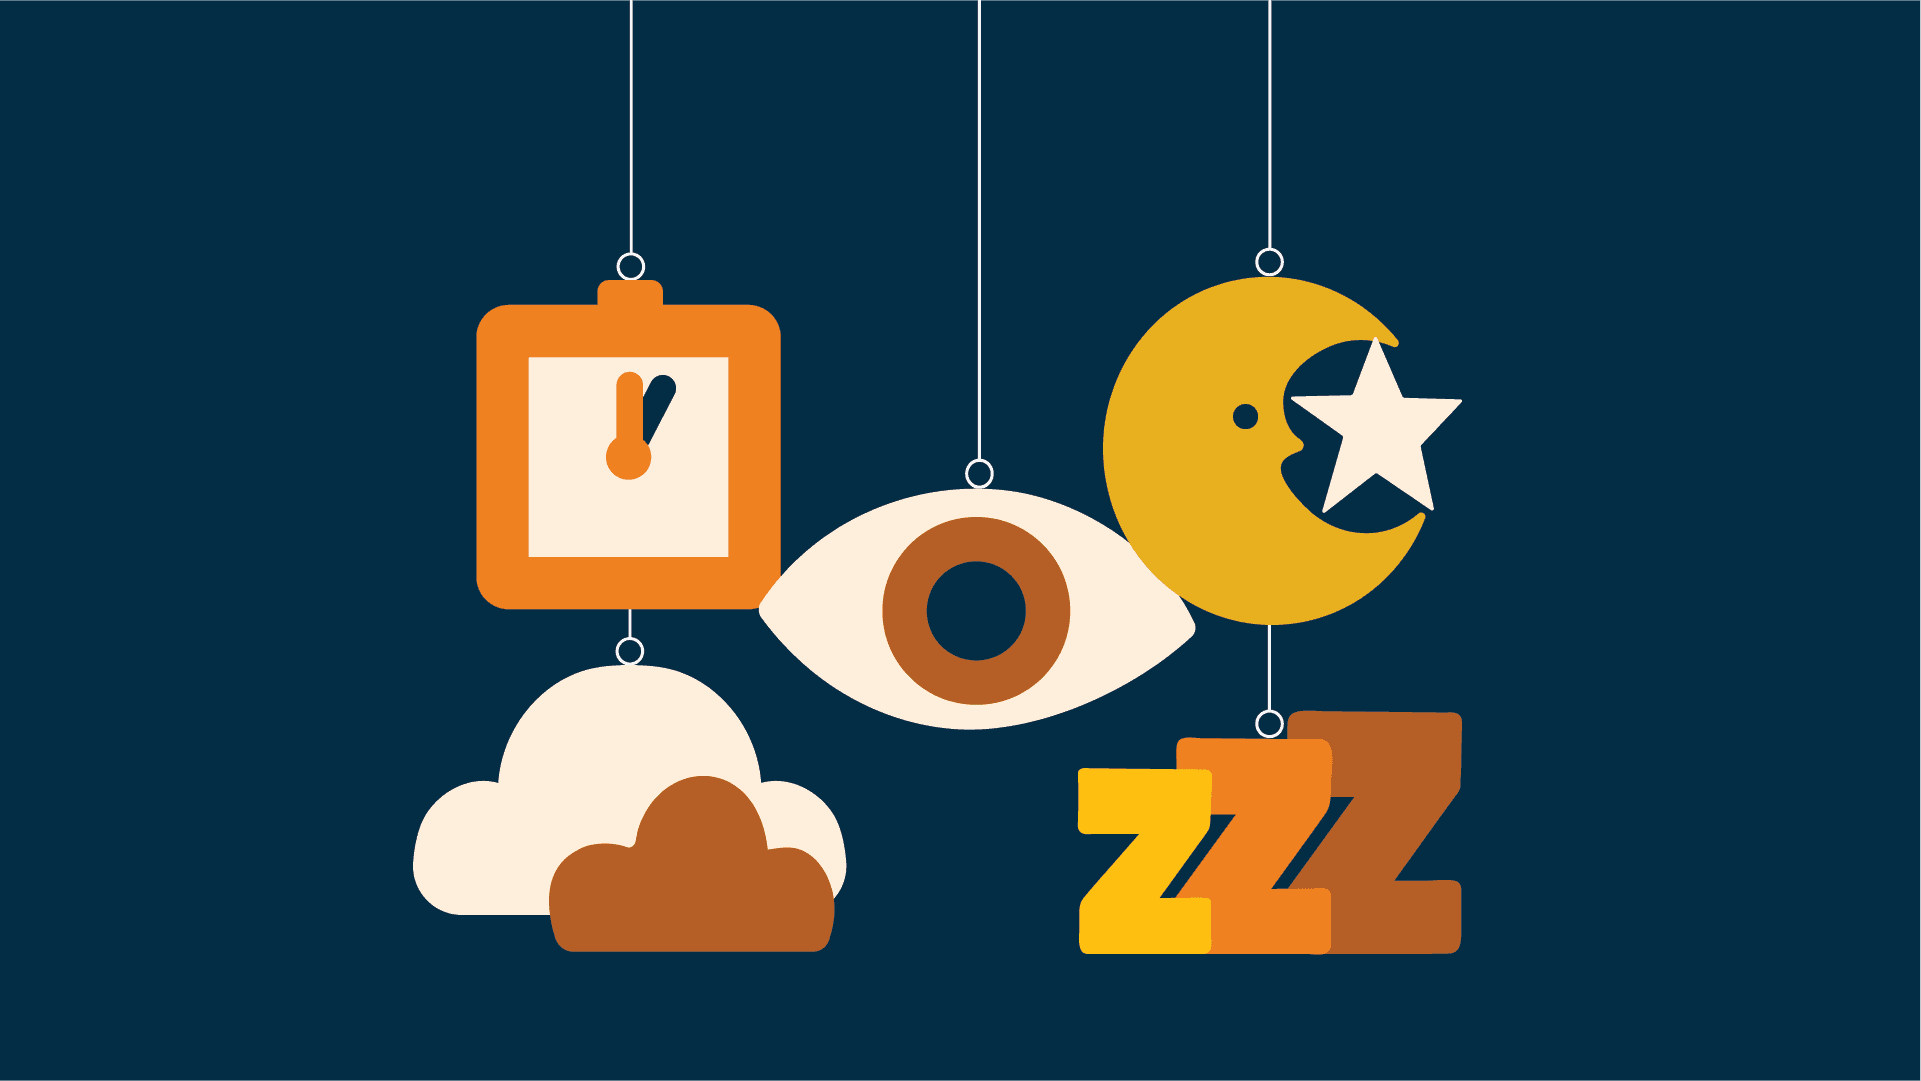 Illustration shows a clock, cloud, eye, moon, and stars to represent sleep and mental health